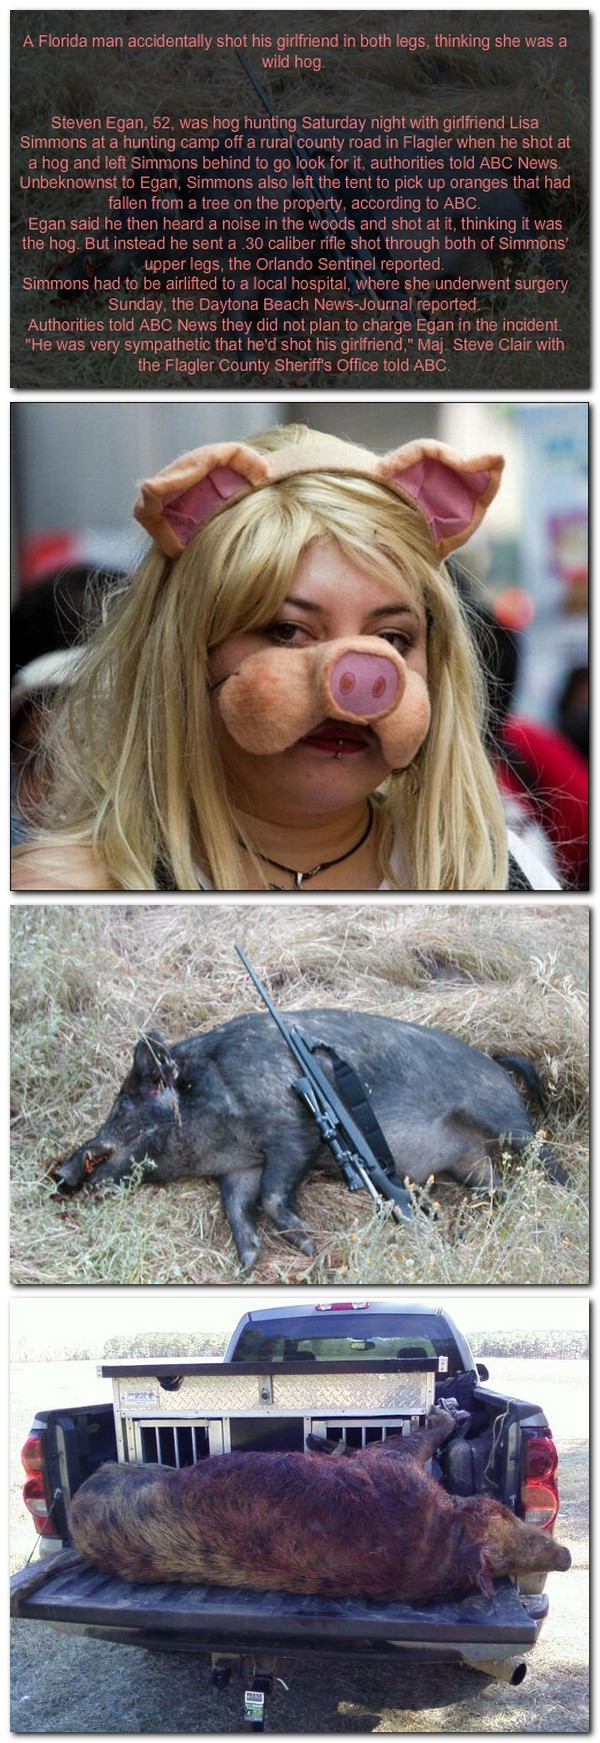 Thinking she looked too much like a hog he decides to shoot her!